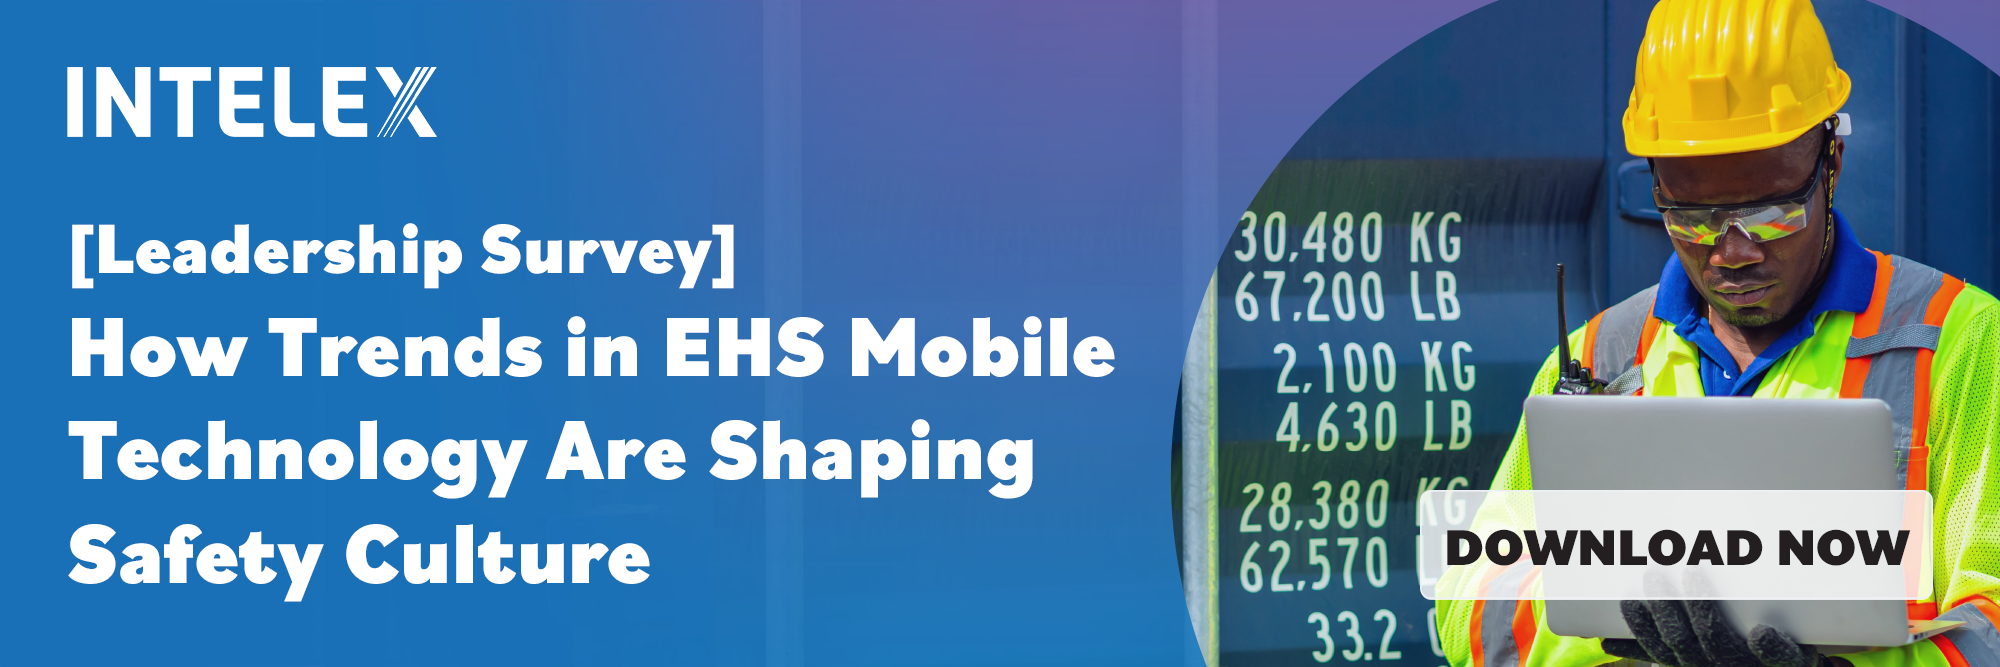 Intelex Report: How New Trends in EHS Mobile Technology are Shaping Safety Culture